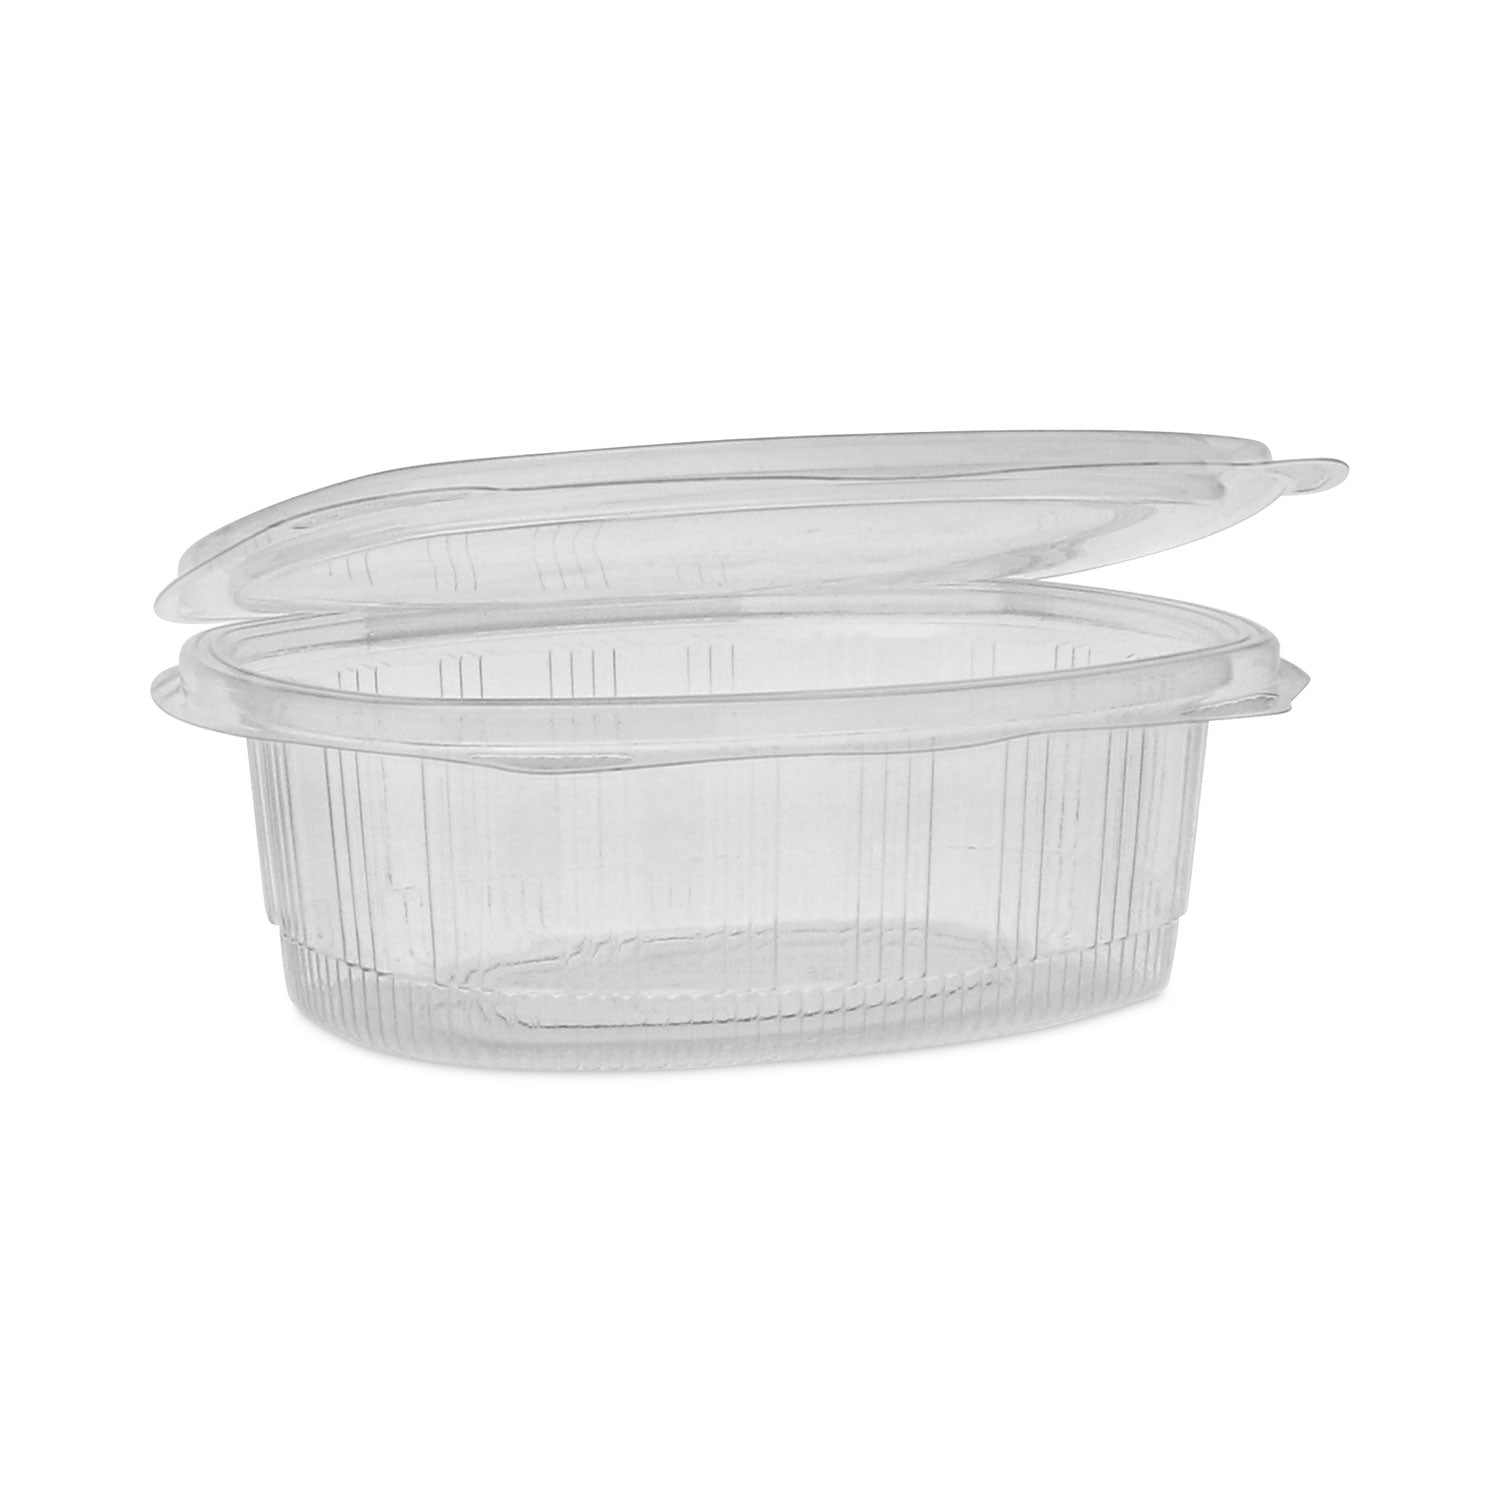 earthchoice-recycled-pet-hinged-container-24-oz-738-x-588-x-238-clear-plastic-280-carton_pctyca910240000 - 2